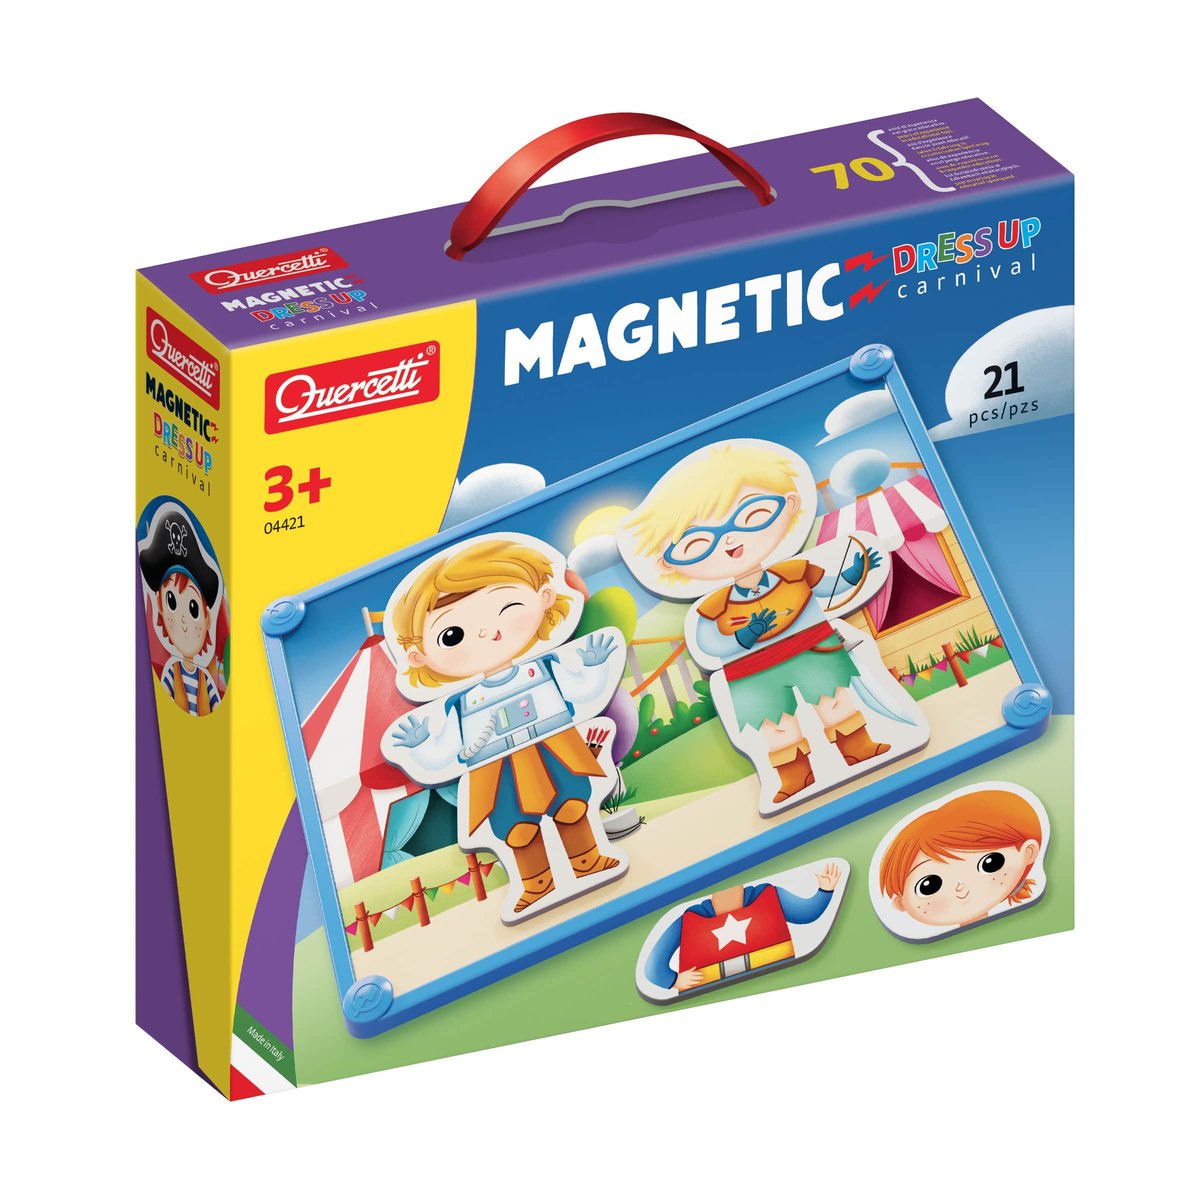 puzzle magnetyczne 21 el. dress up carnival